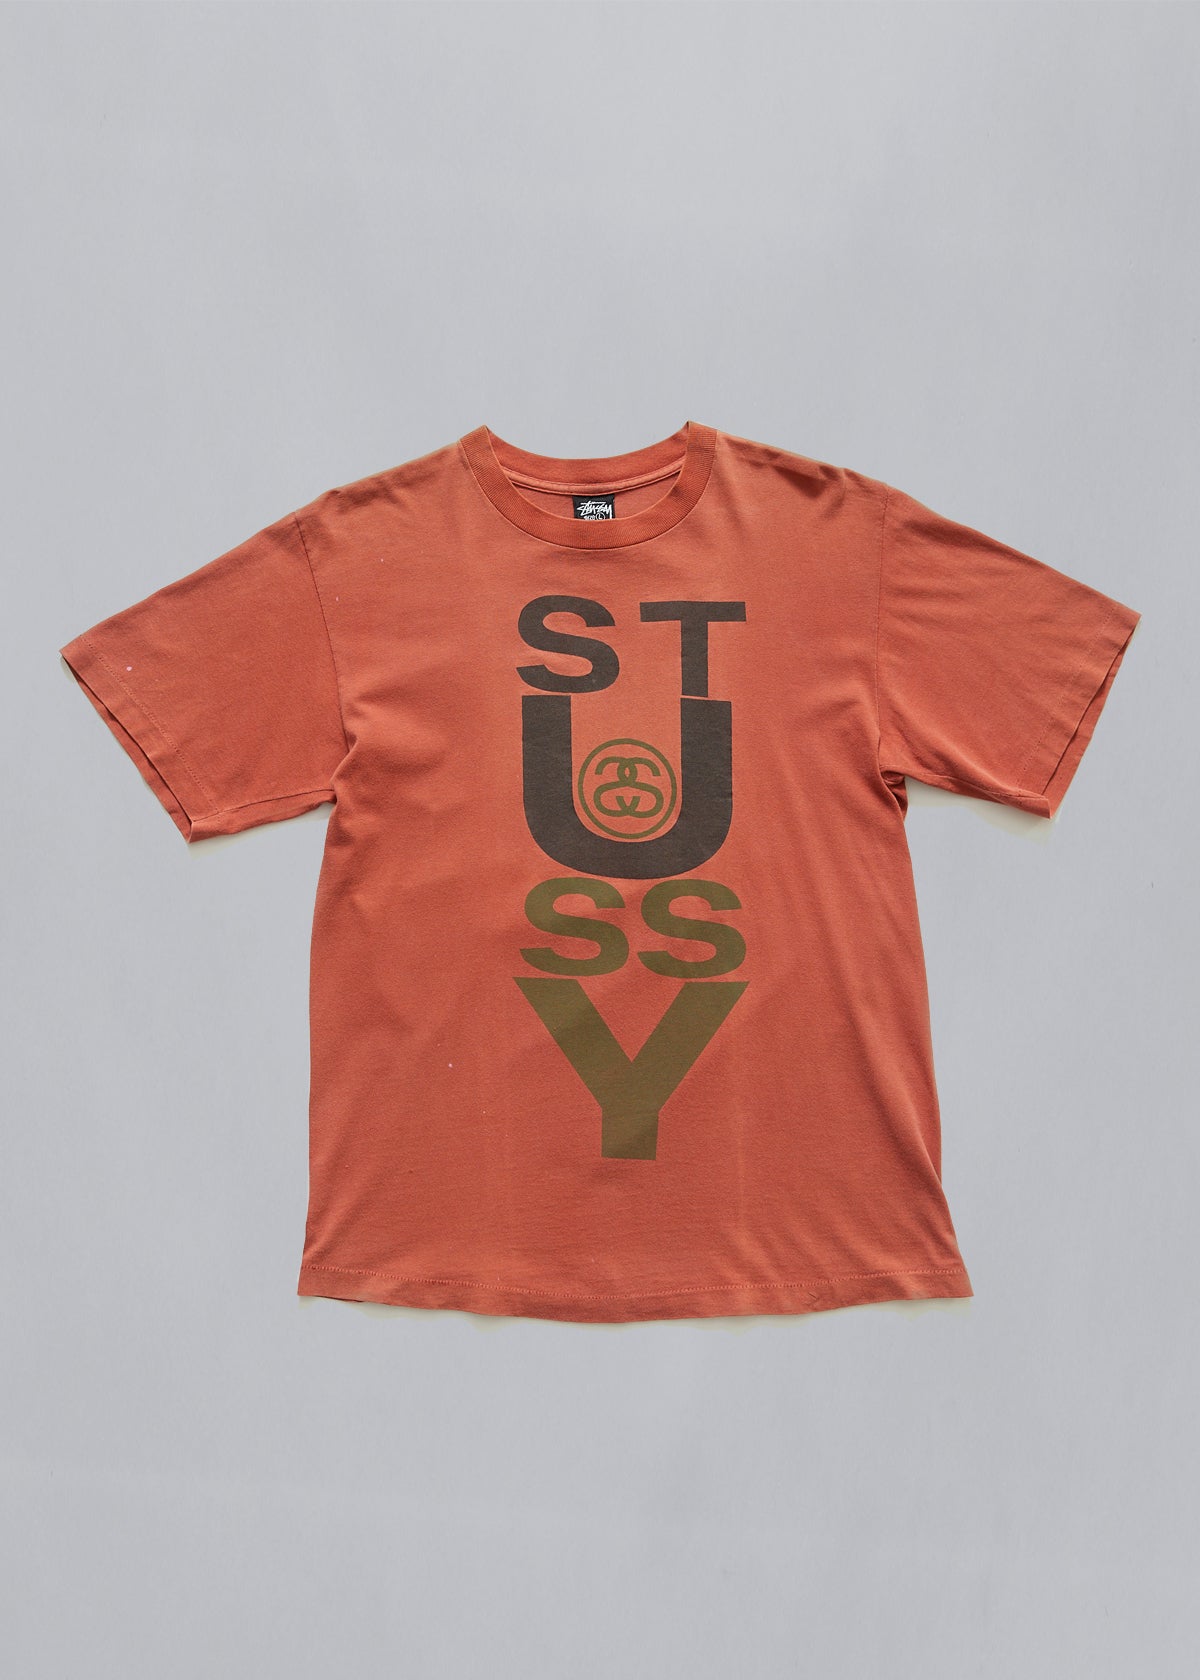 Rust Big Letters Logo Tee 1990's - Large